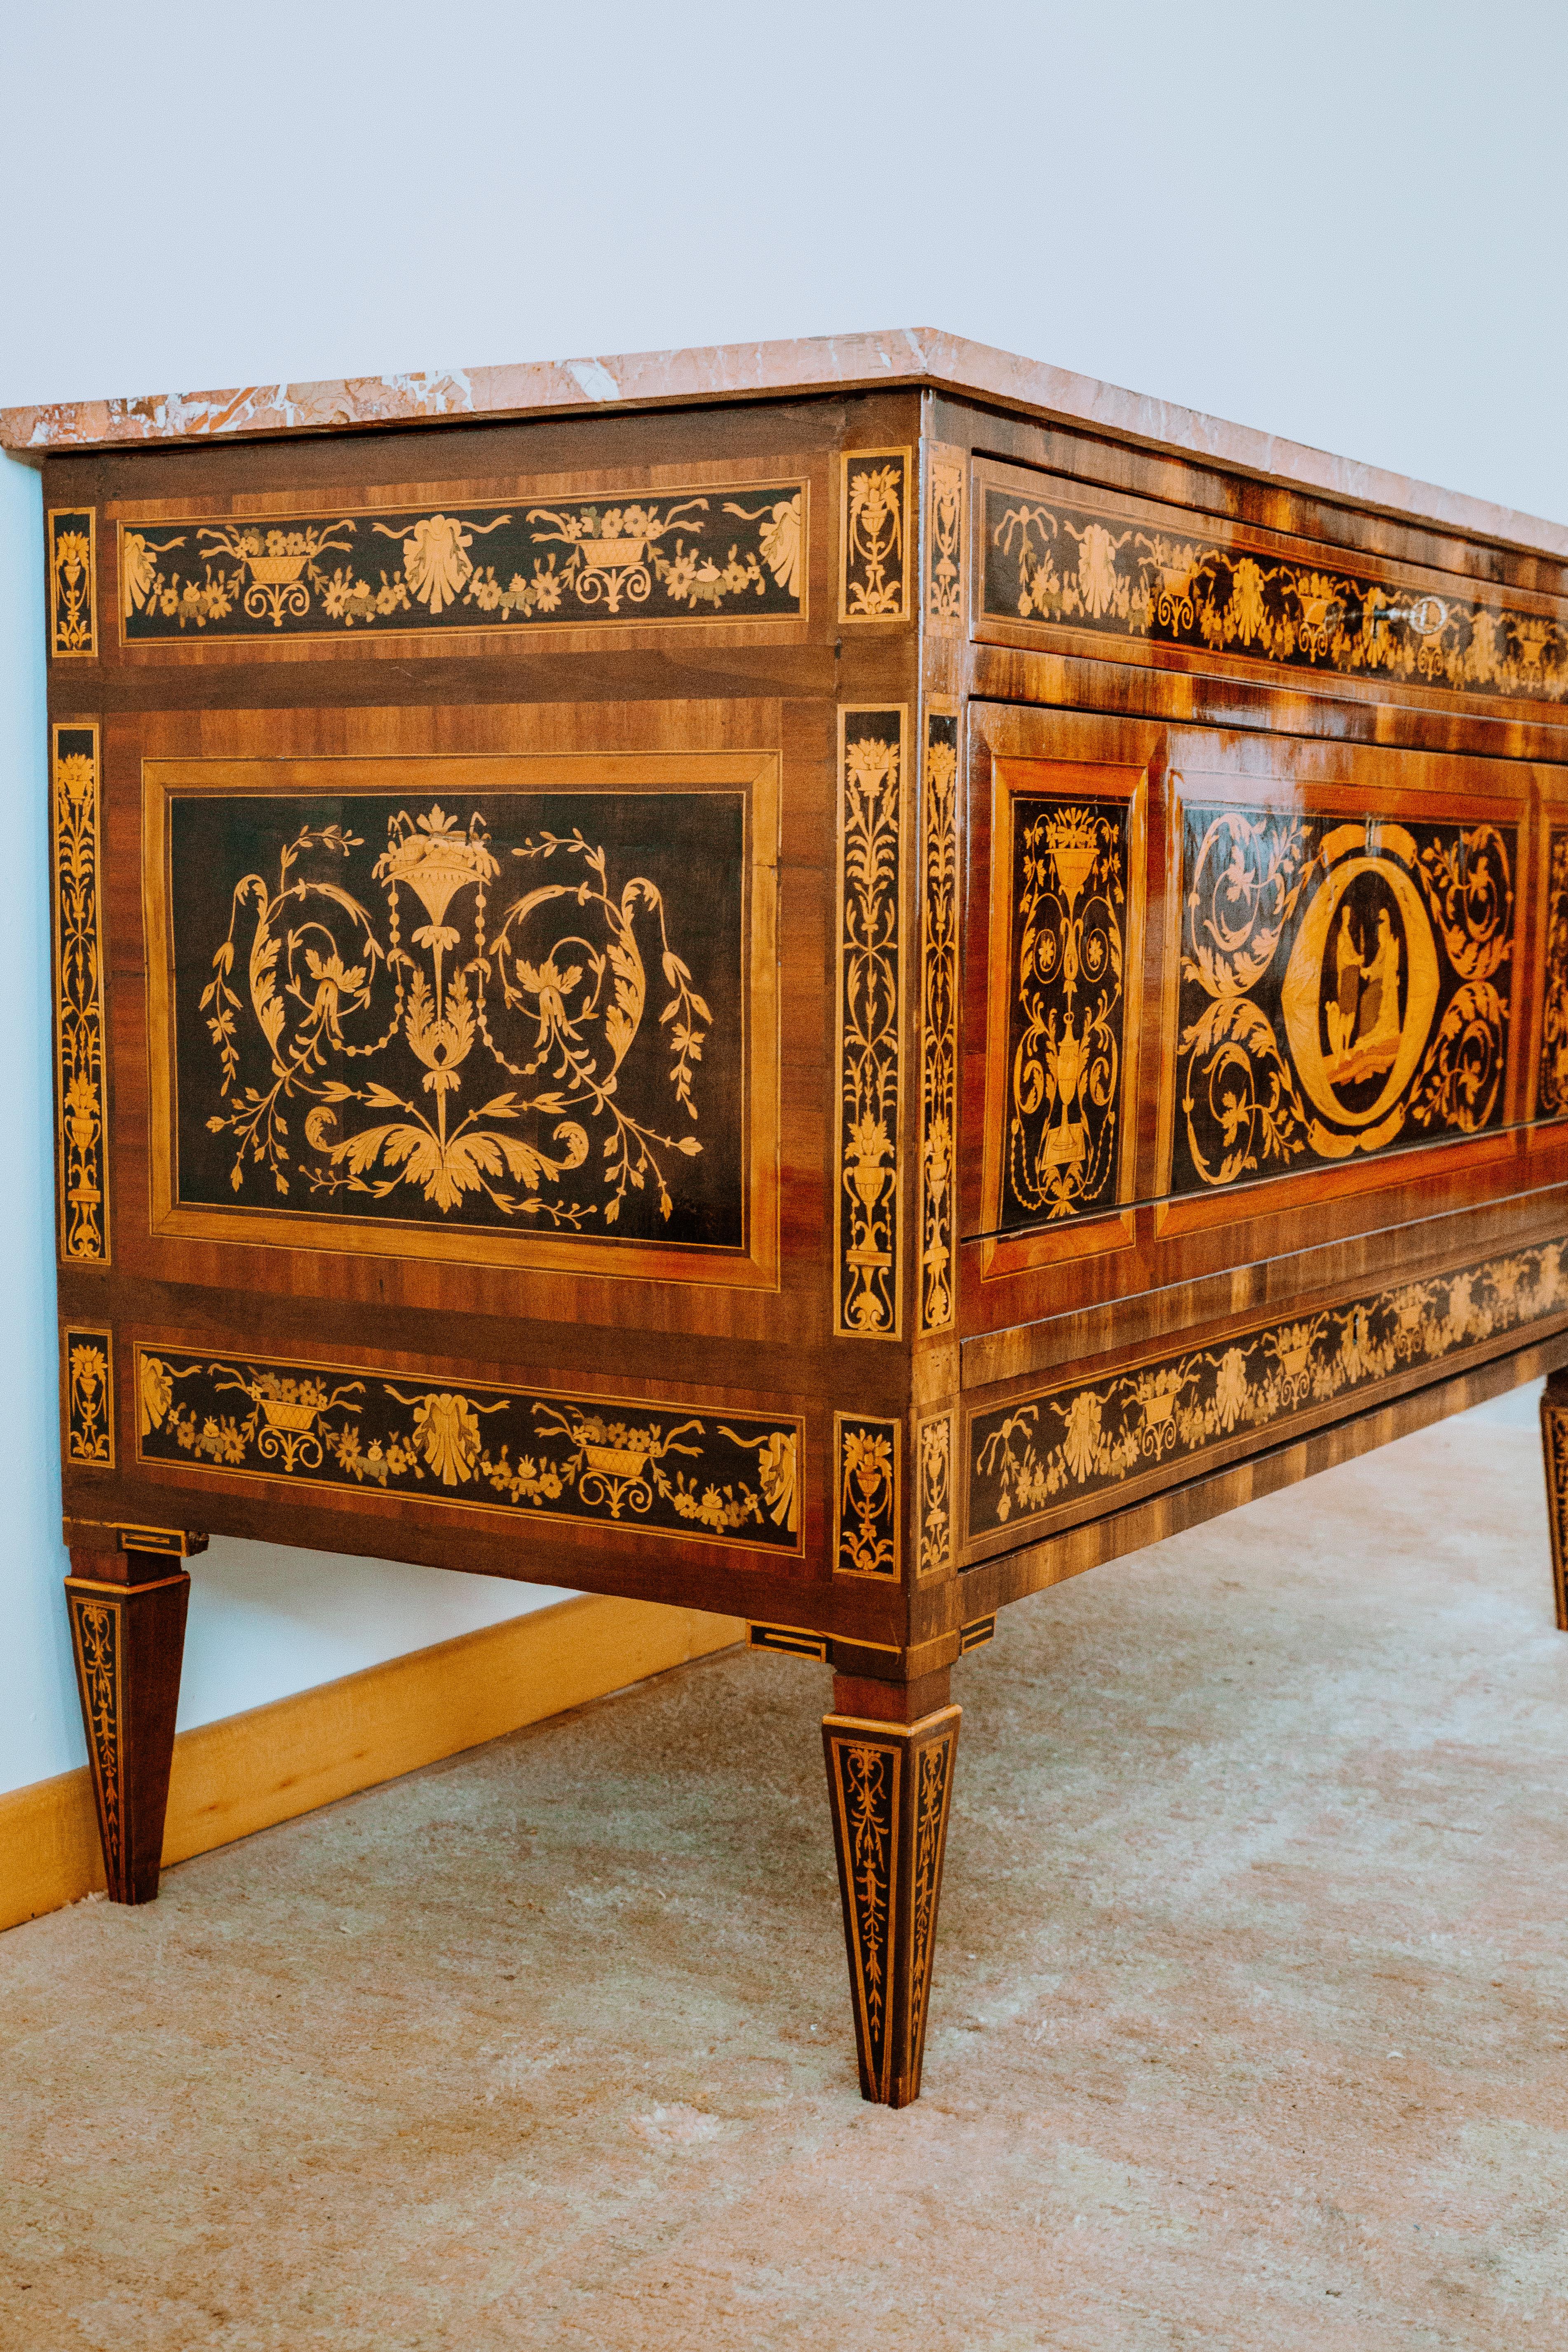 This exceptional pair of Italian neoclassical 18th century dressers in wood richly inlaid on the front, sides and 4 truncated pyramid legs are top-quality example of Italian 18th century cabinetmaking. The pair of commodes are originals from the